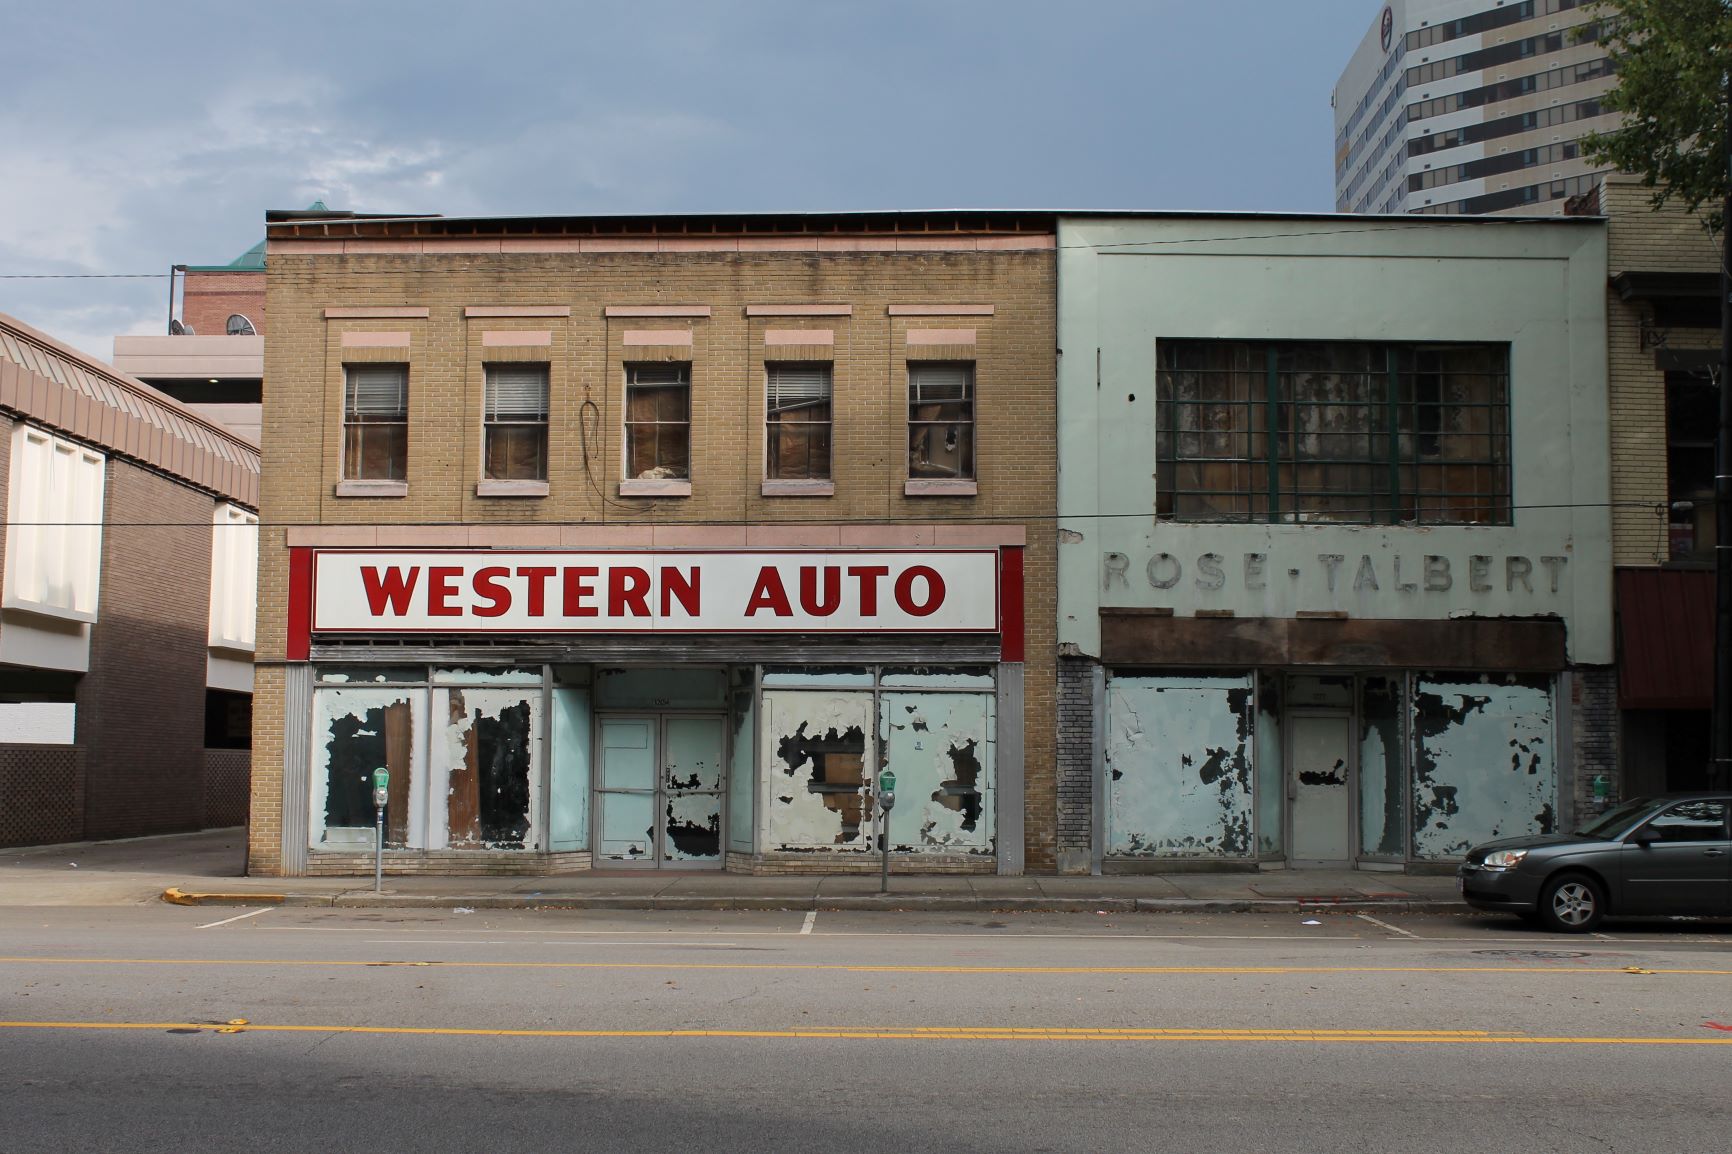 The Western Auto building (1940) and Rose-Talbert building (1914) in downtown Columbia